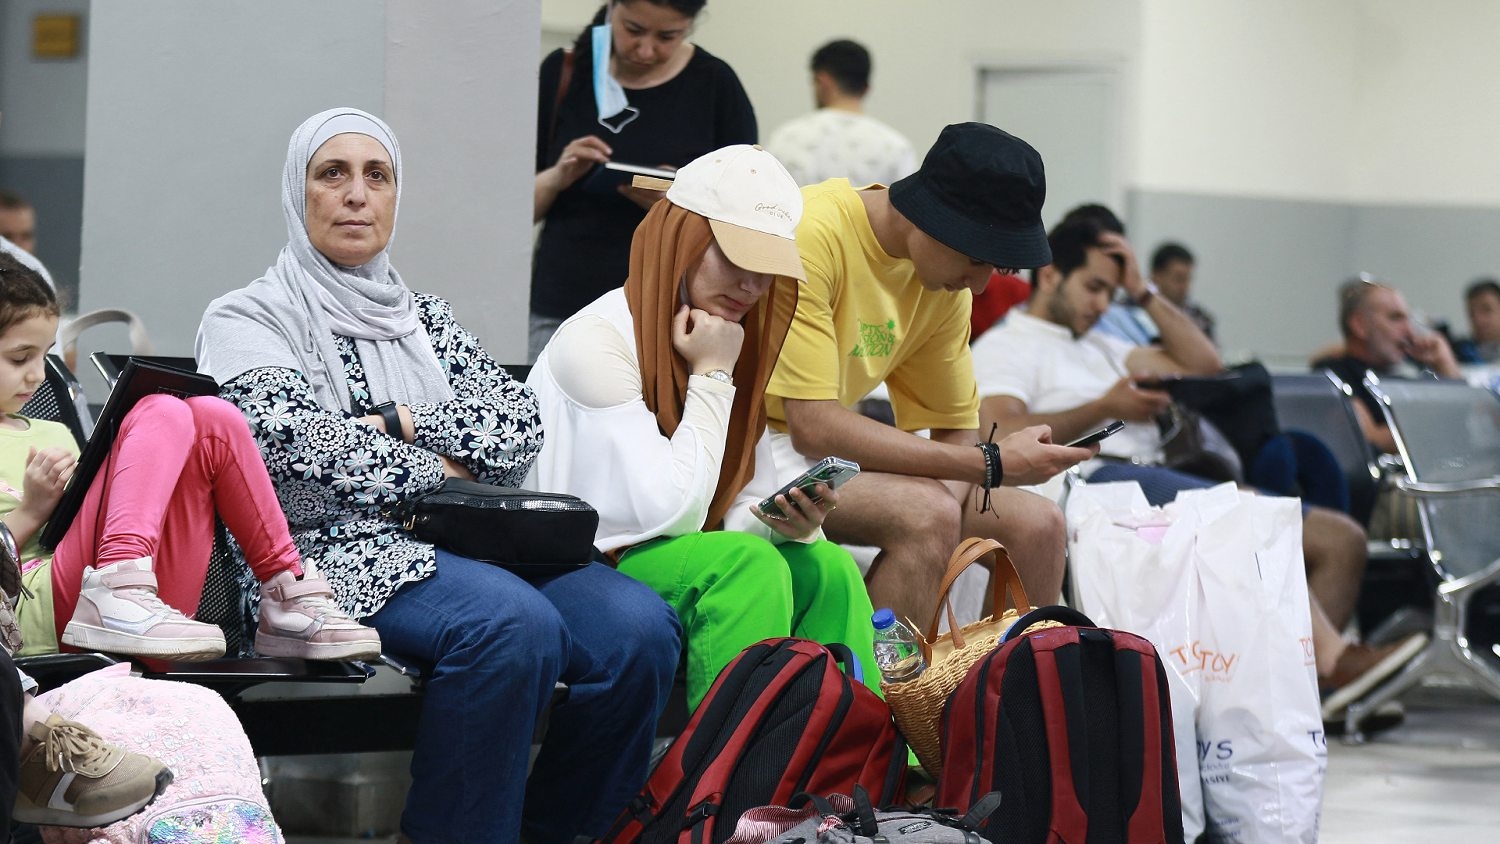 Passengers sit in a waiting room on the Jordanian side of the King Hussein Bridge (also known as Allenby Bridge) crossing between the West Bank and Jordan on 19 July 2022.